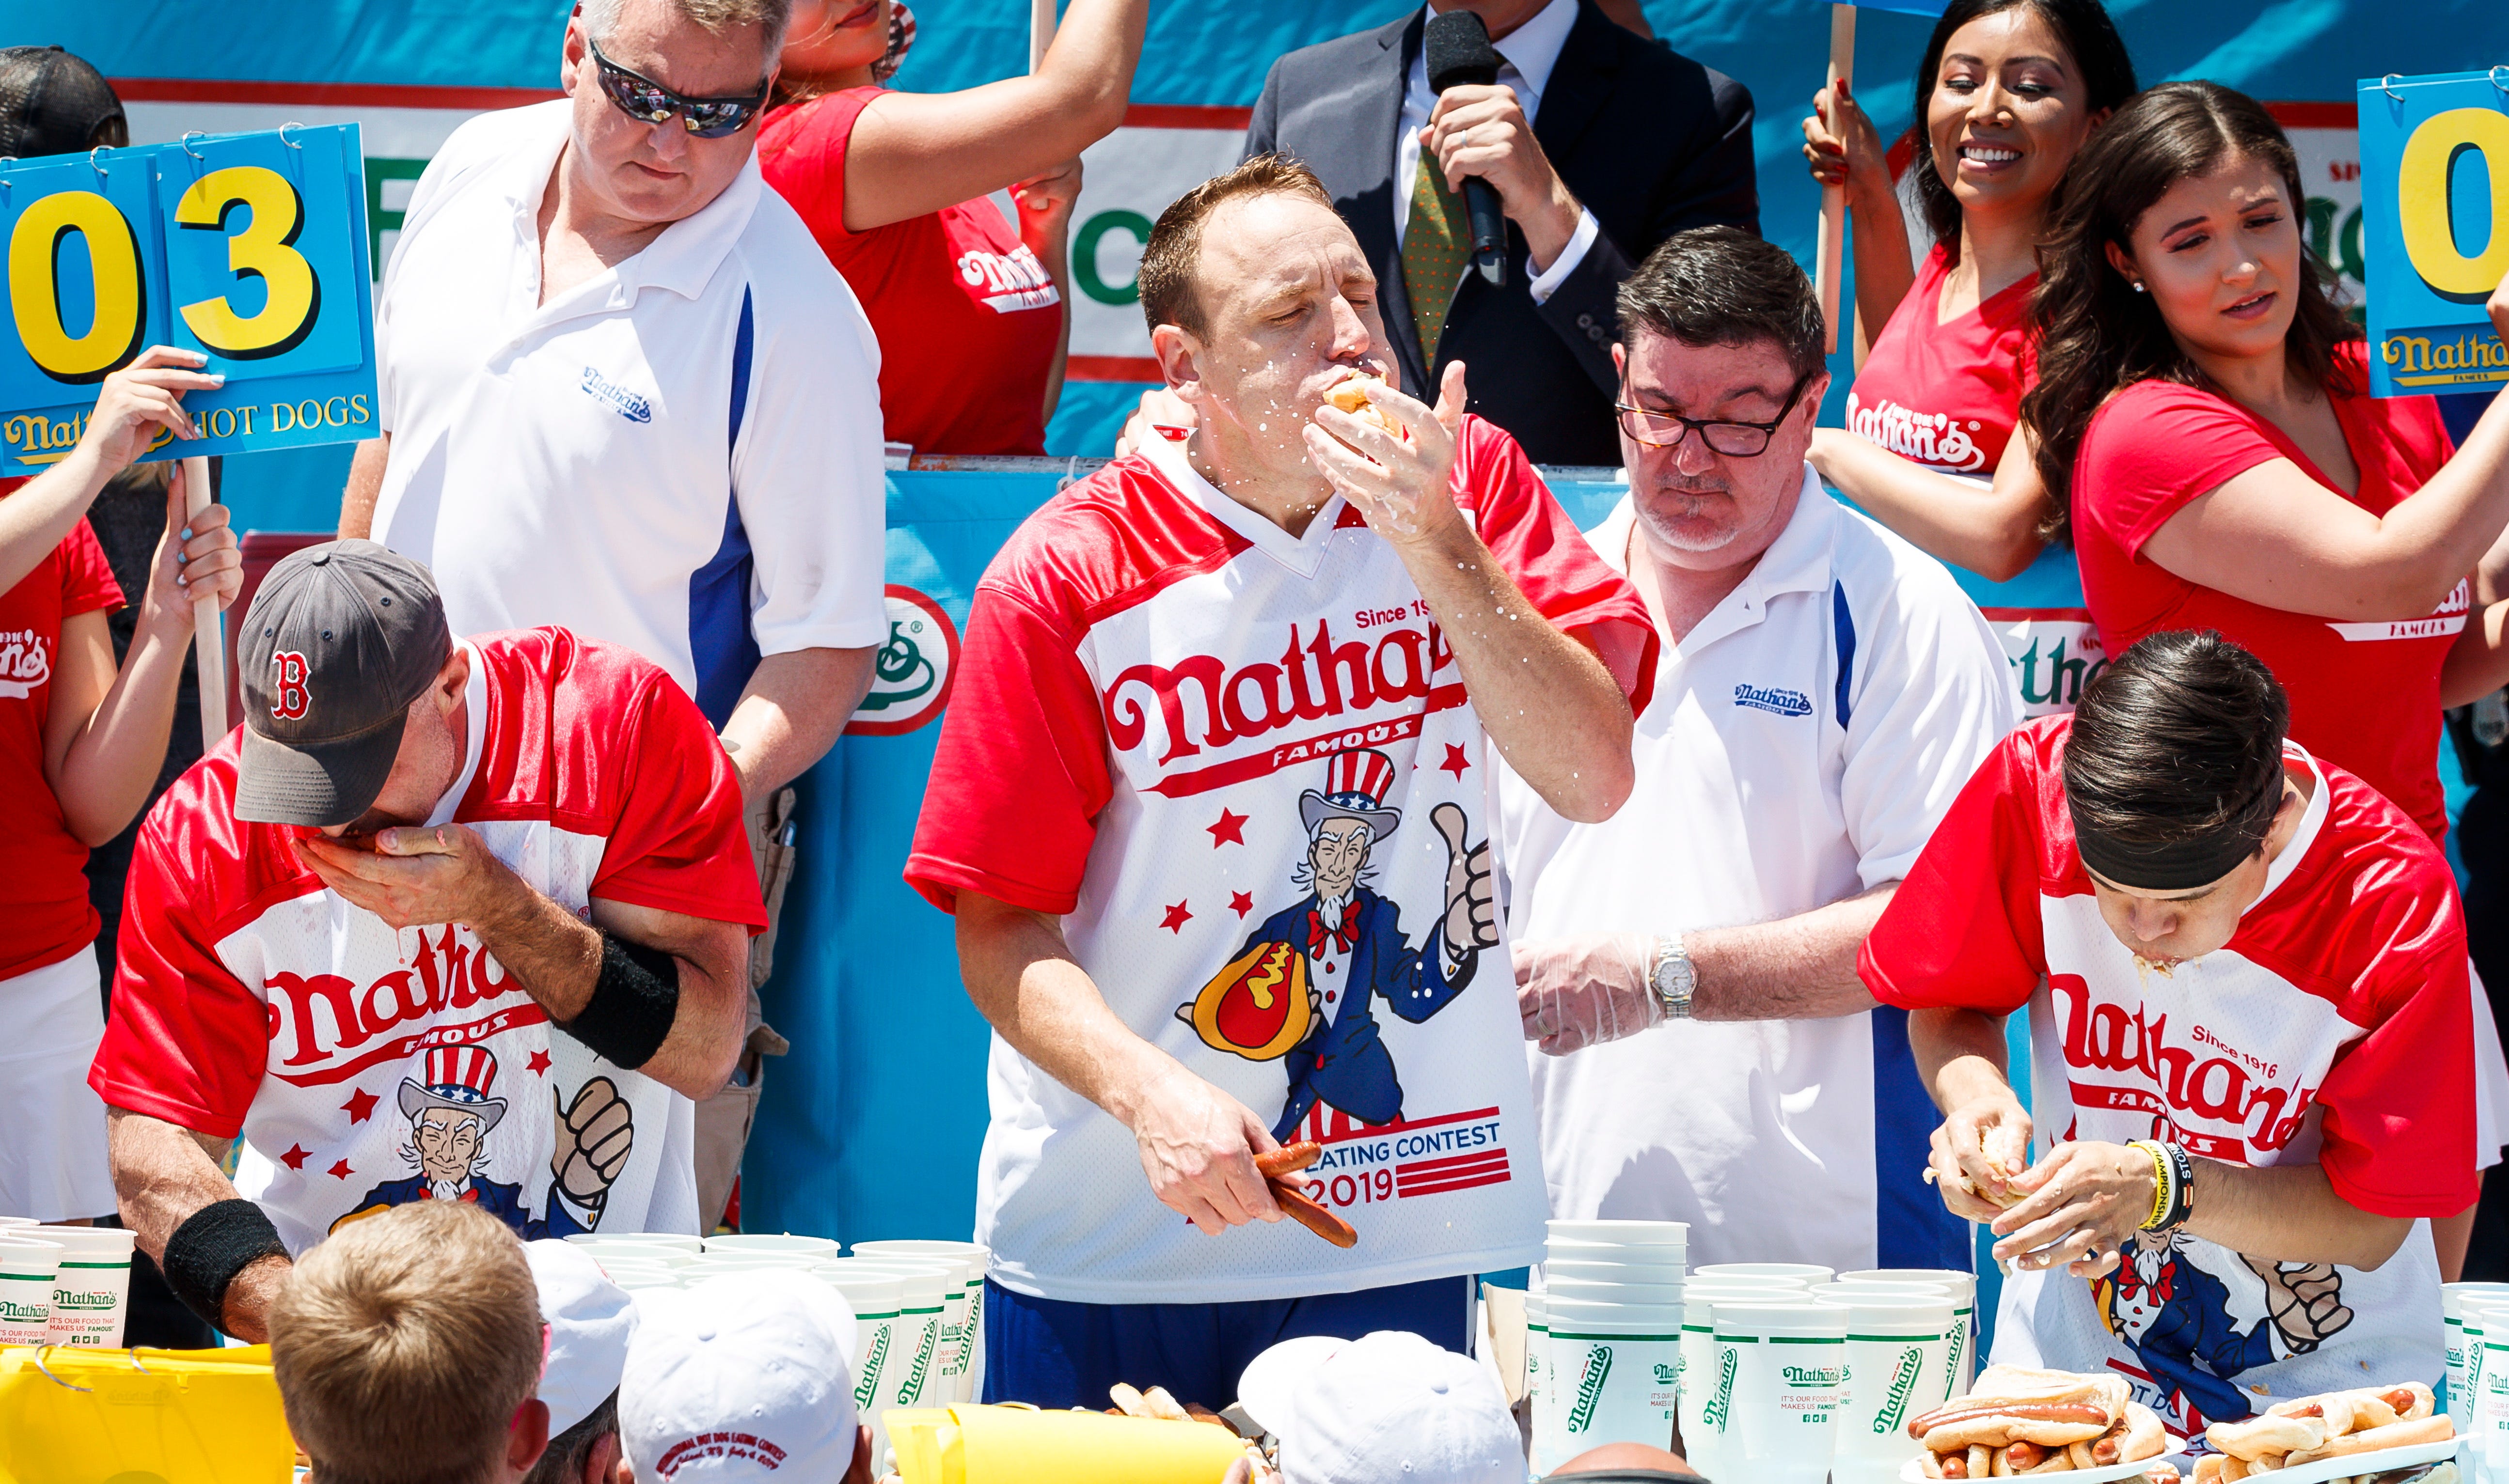 Hot dog contest Best images from the Joey Chestnut's 12th victory